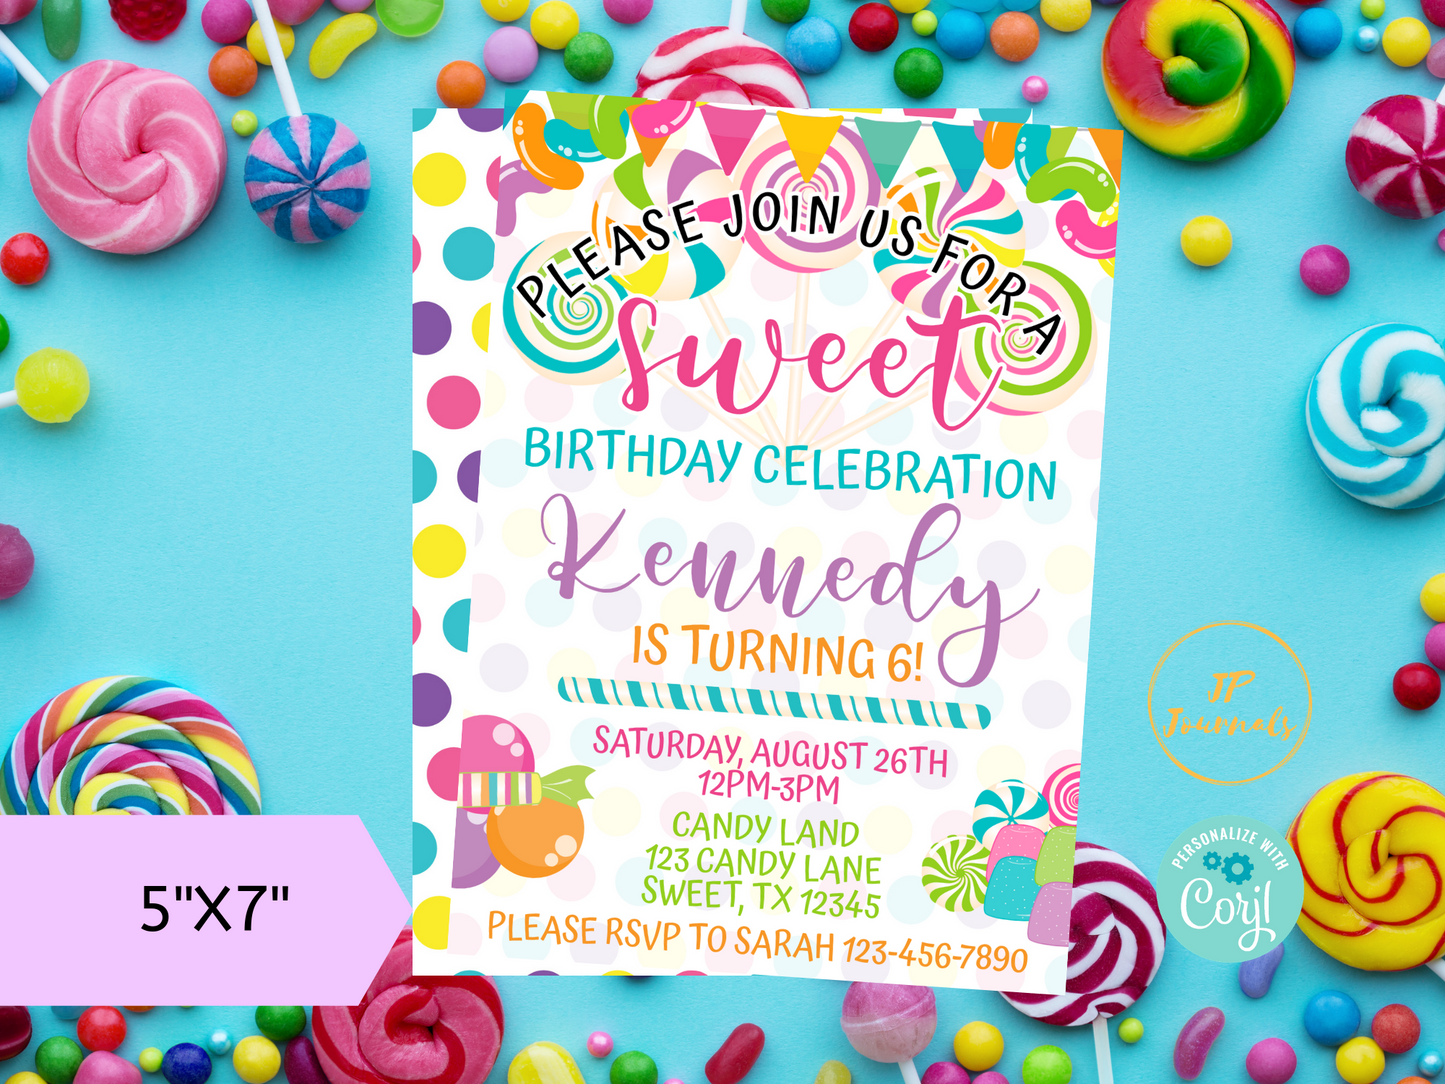 Sweet Candy Land Birthday Party Invitation Template - DIY Edit Printable Invite